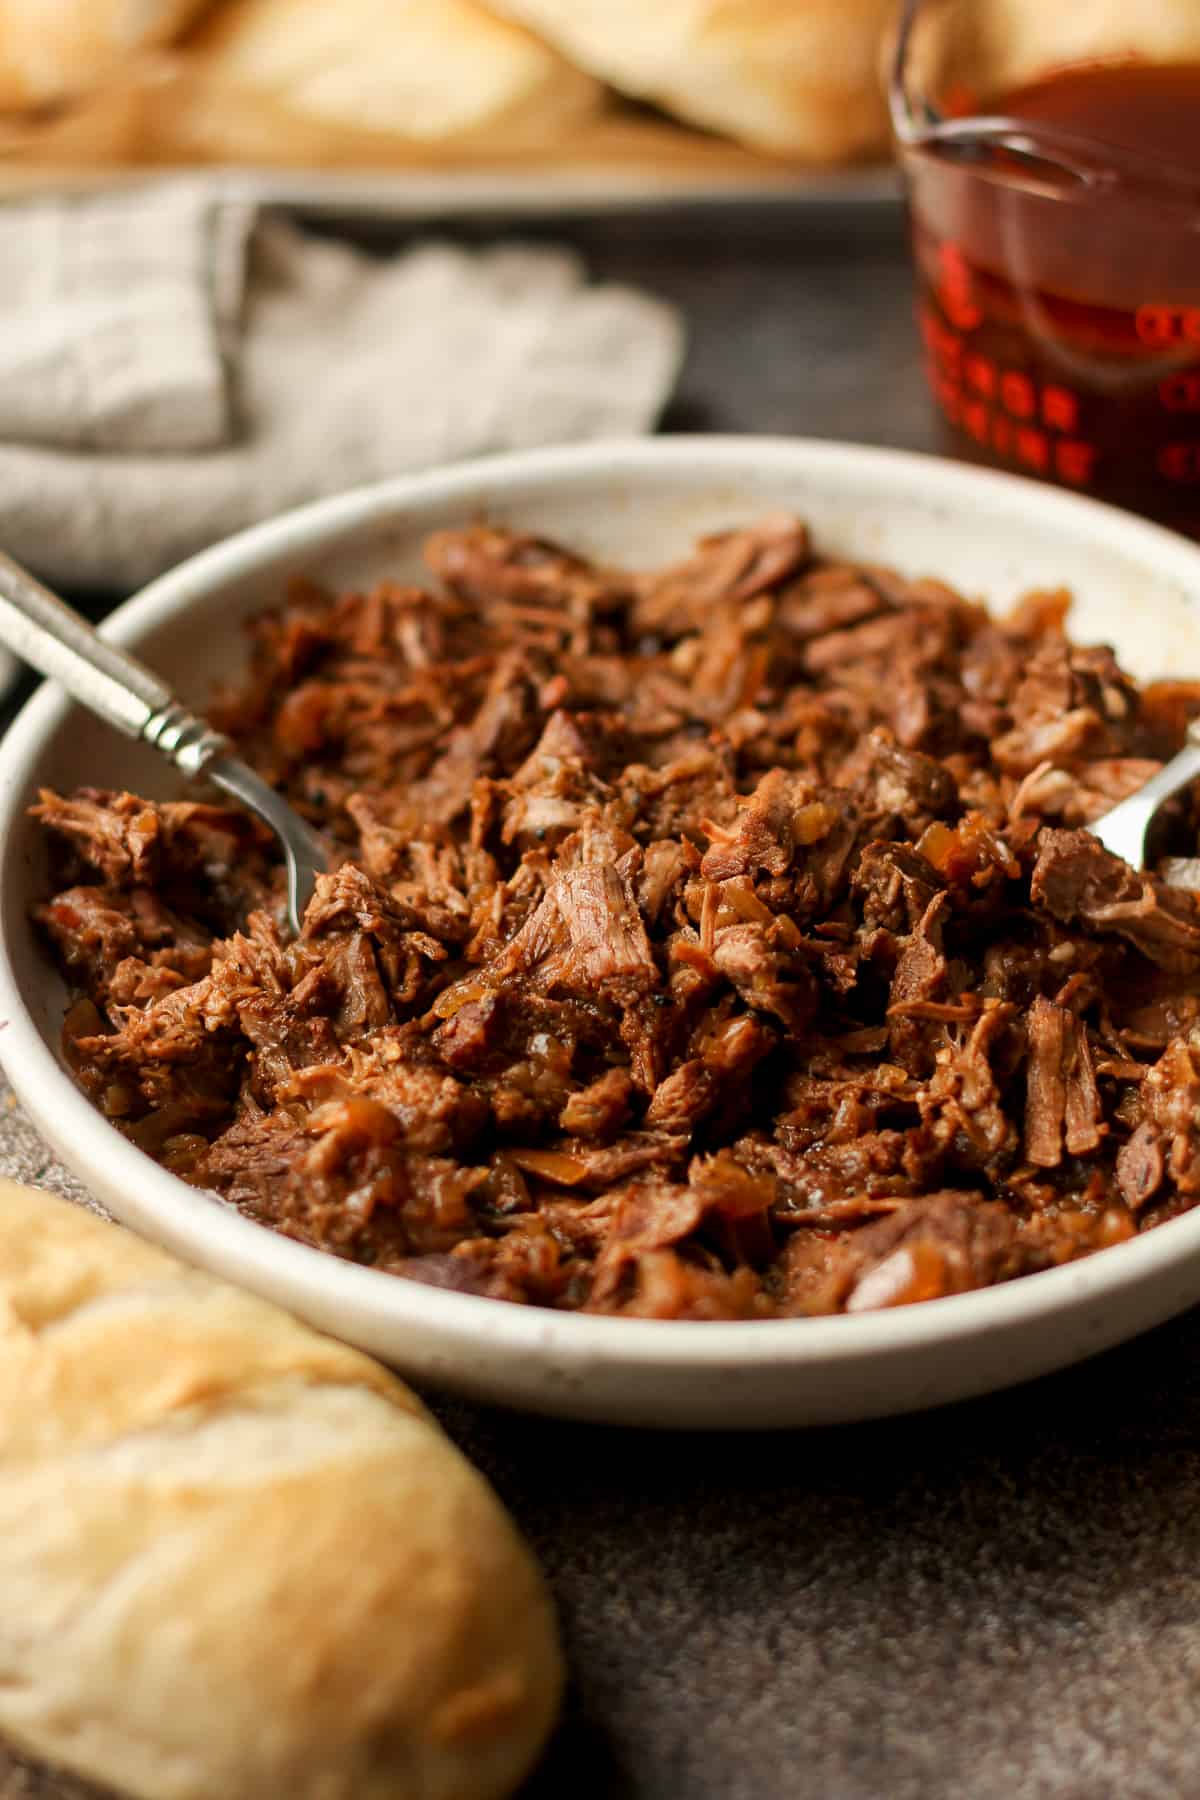 Side view of a bowl of shredded beef.